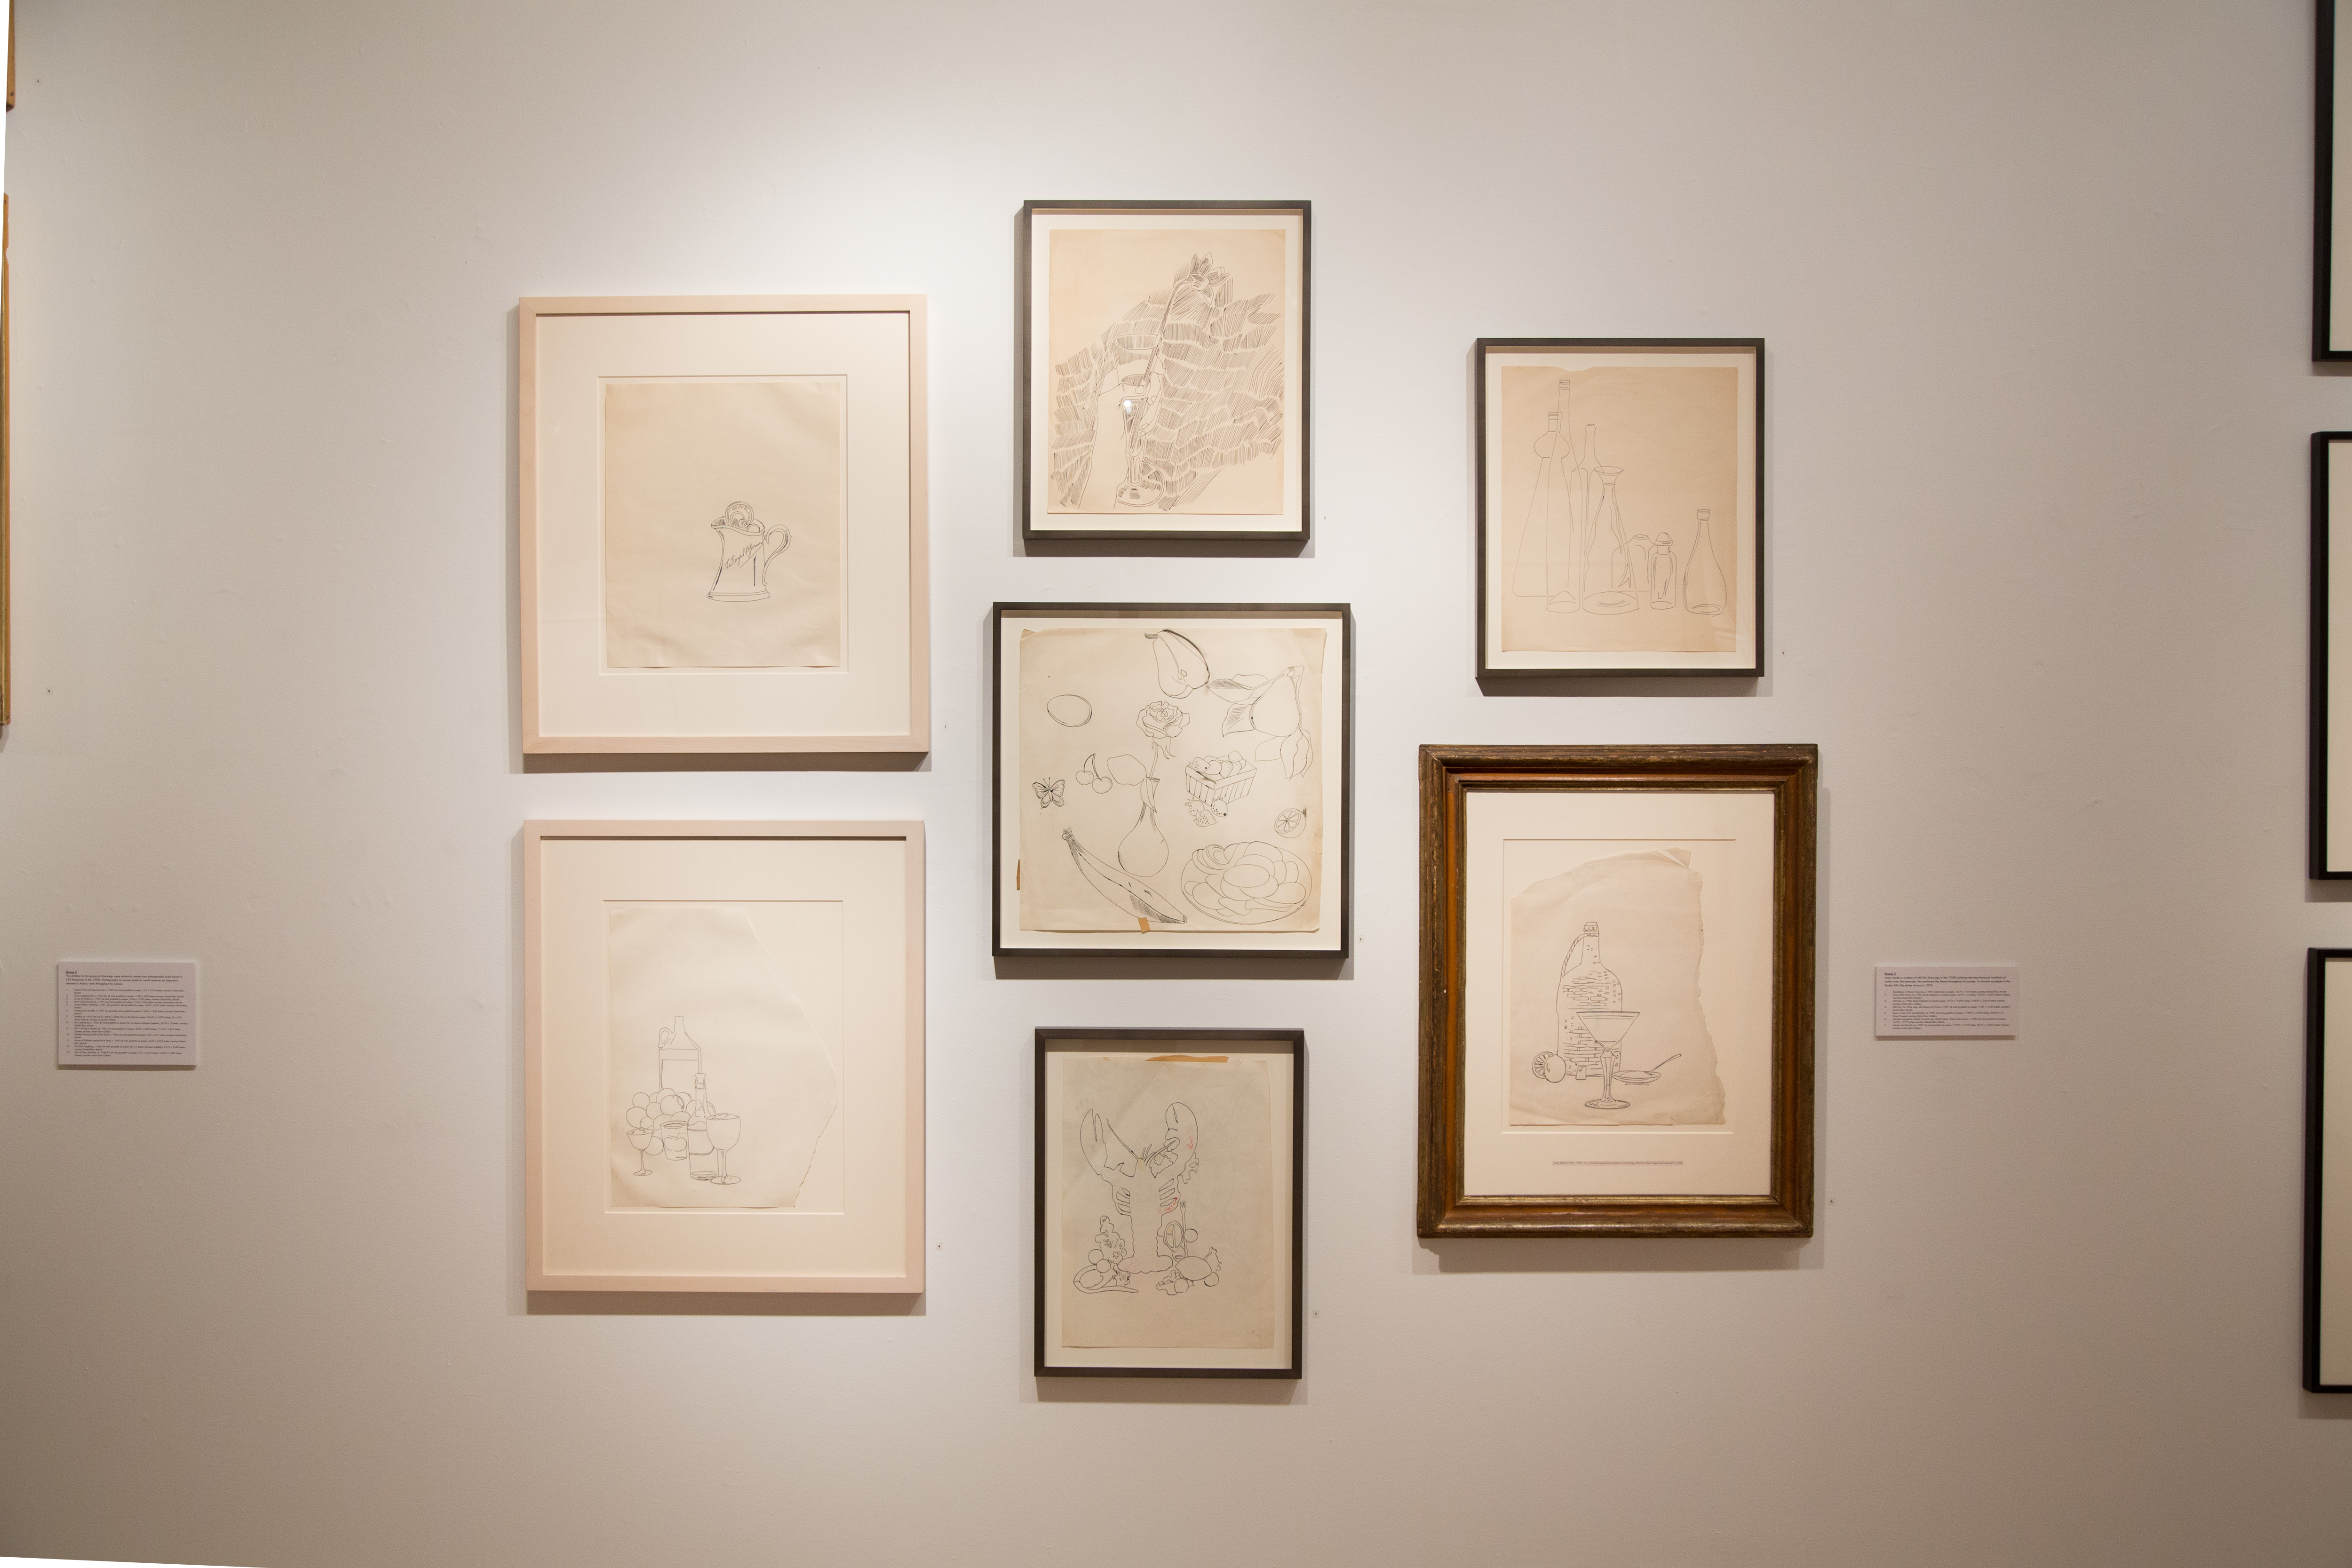 Over 150 Andy Warhol Drawings Head to the New York Academy of Art